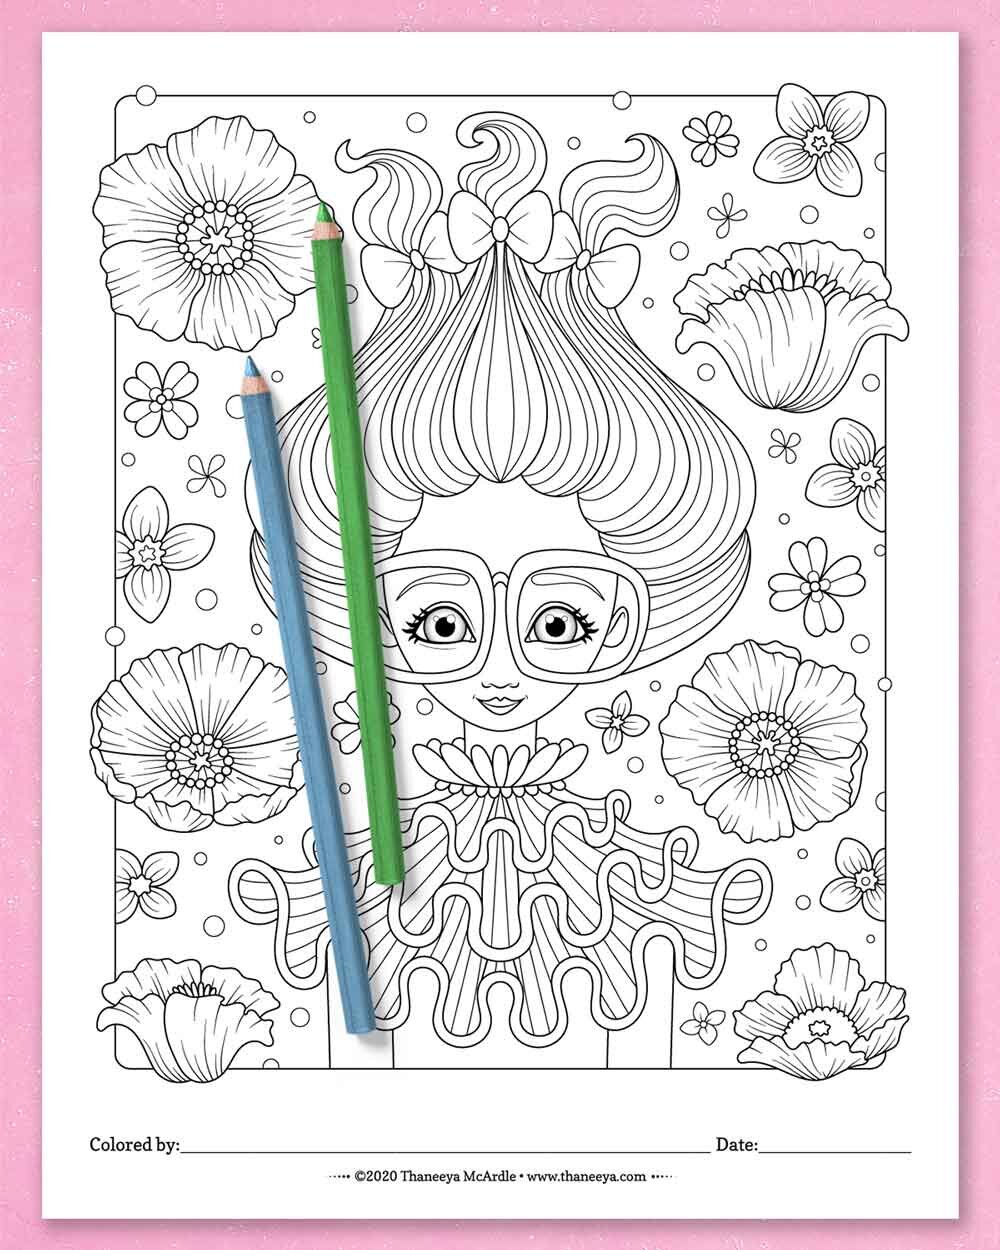 https://images.squarespace-cdn.com/content/v1/5511fc7ce4b0a3782aa9418b/1585599132930-EEPYYHMEHUO6TWFTDMTG/Enchanted-Faces-Coloring-Pages-by-Thaneeya-McArdle-2.jpg